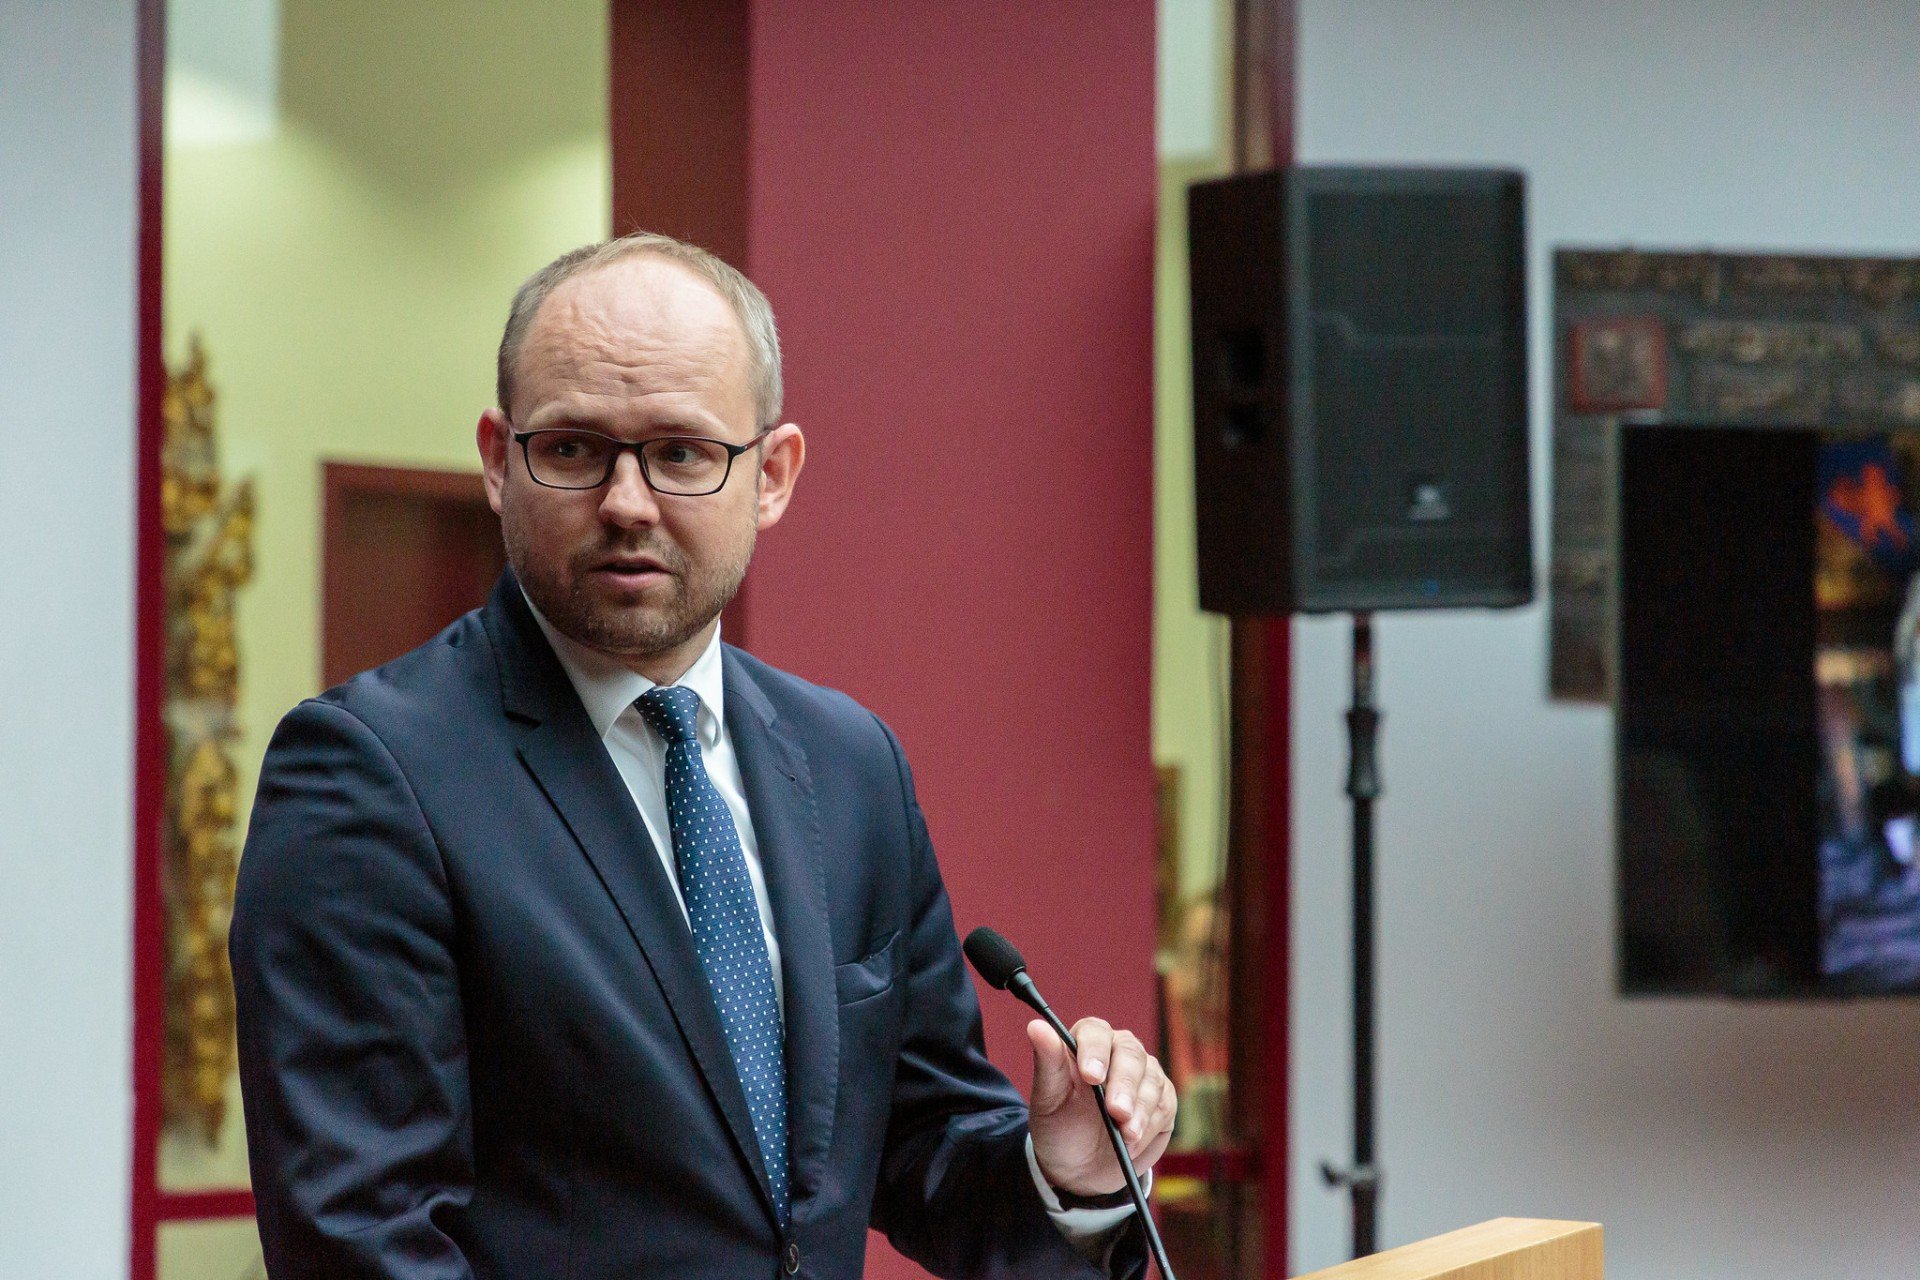 Fot. Fot: Sebastian Indra / MSZ / Ministry of Foreign Affairs of the Republic of Poland / Flickr